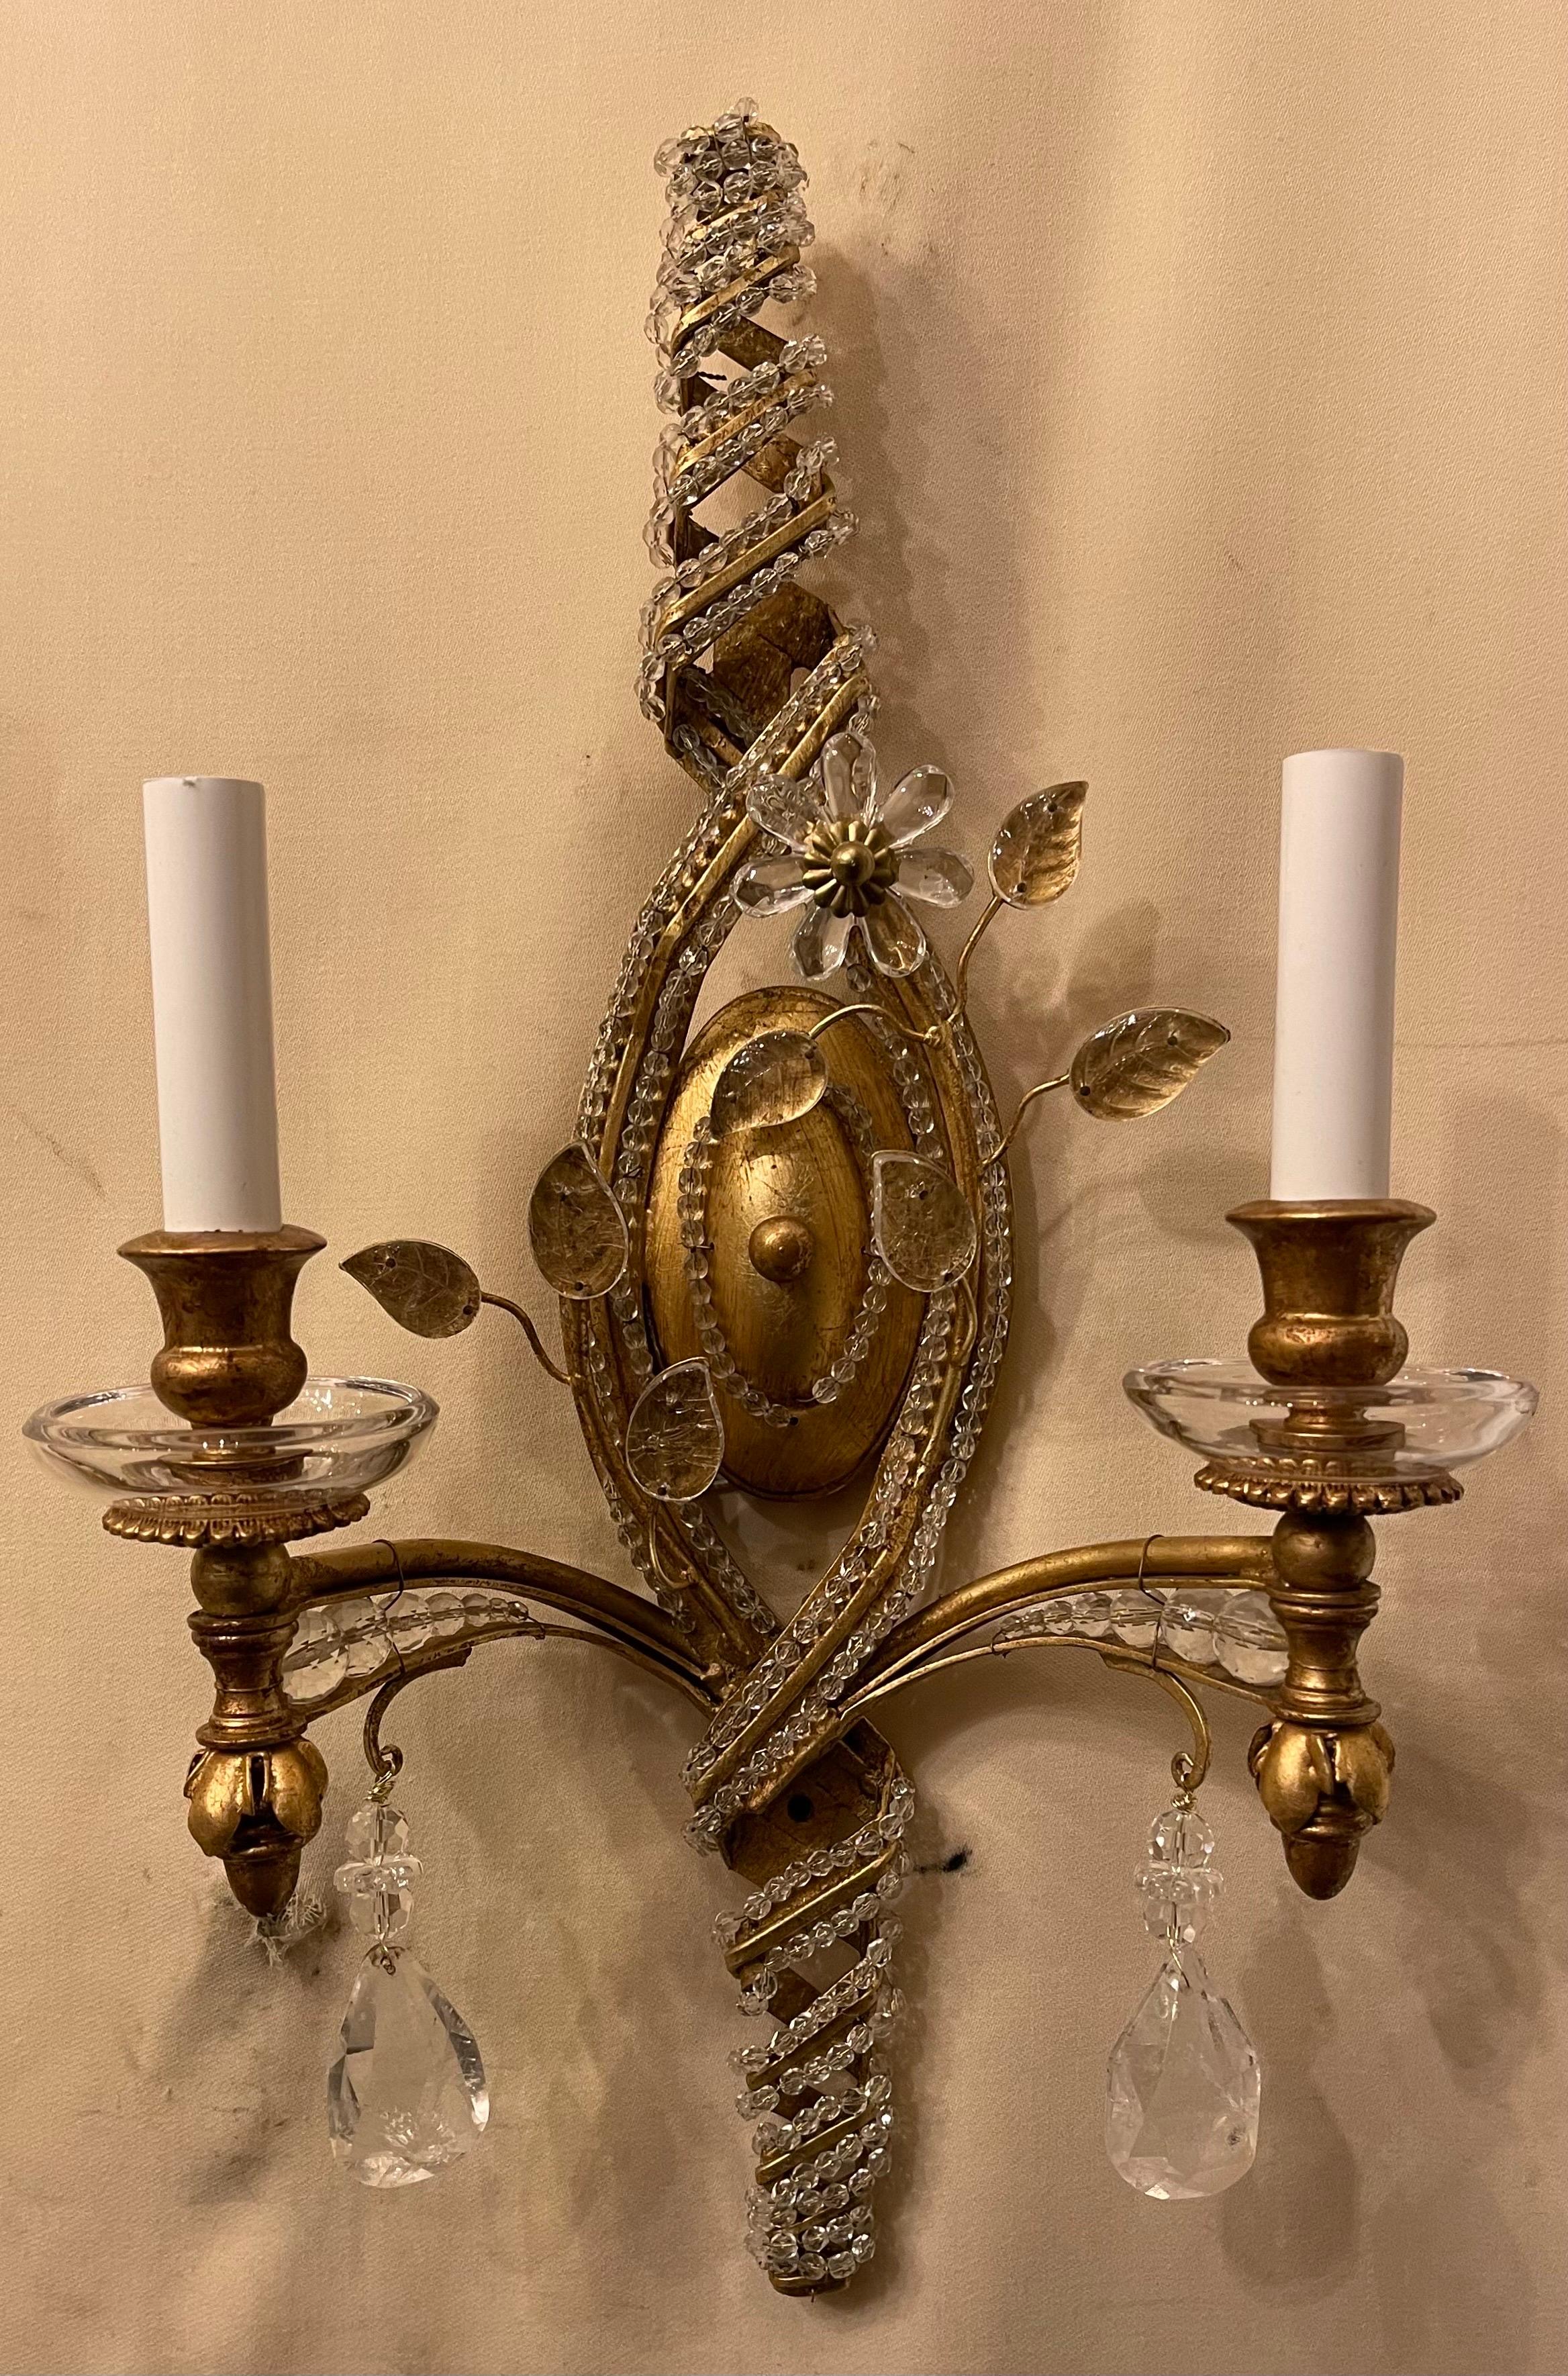 A wonderful pair of gold gilt, rock crystal drop Maison Bagues style sconces with beaded spiral design leading to two candelabra lights situated inside clear cups. The sconces have been rewired with new sockets and come ready to install with